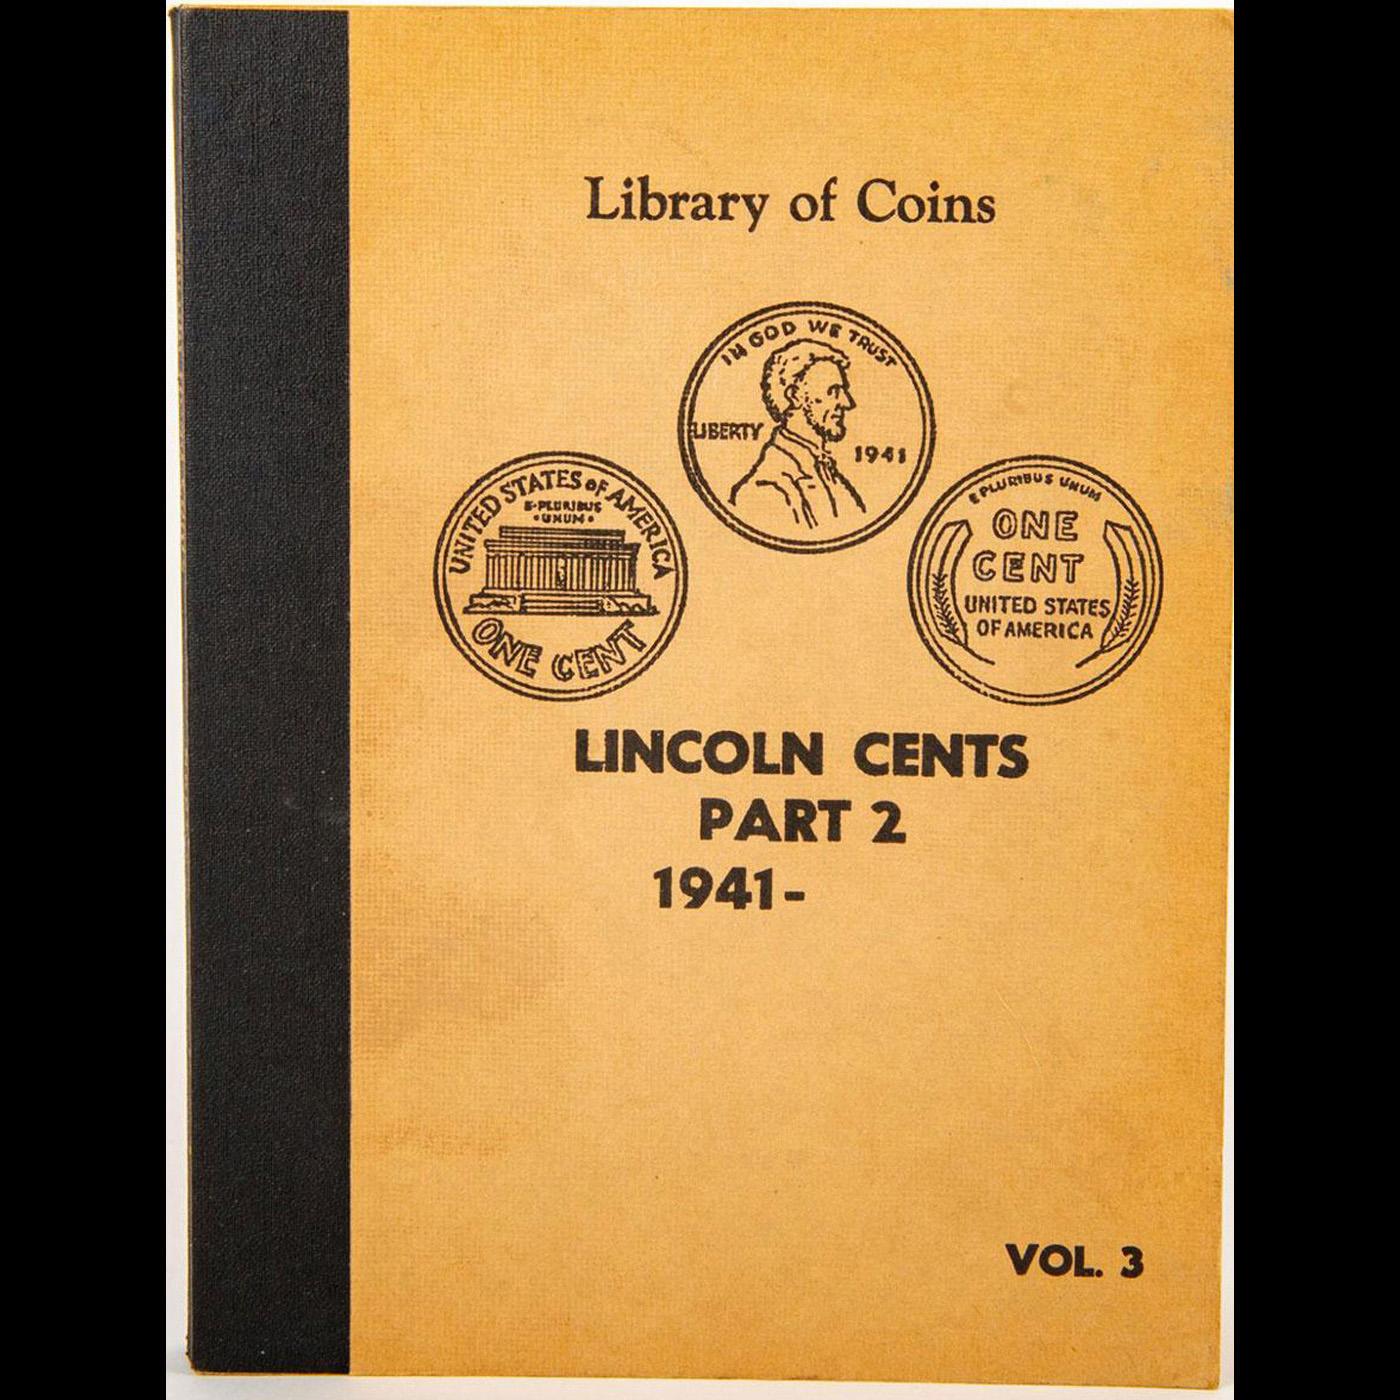 "Library of Coins" Collectors Book - No Coins - Lincoln Cents 1941-